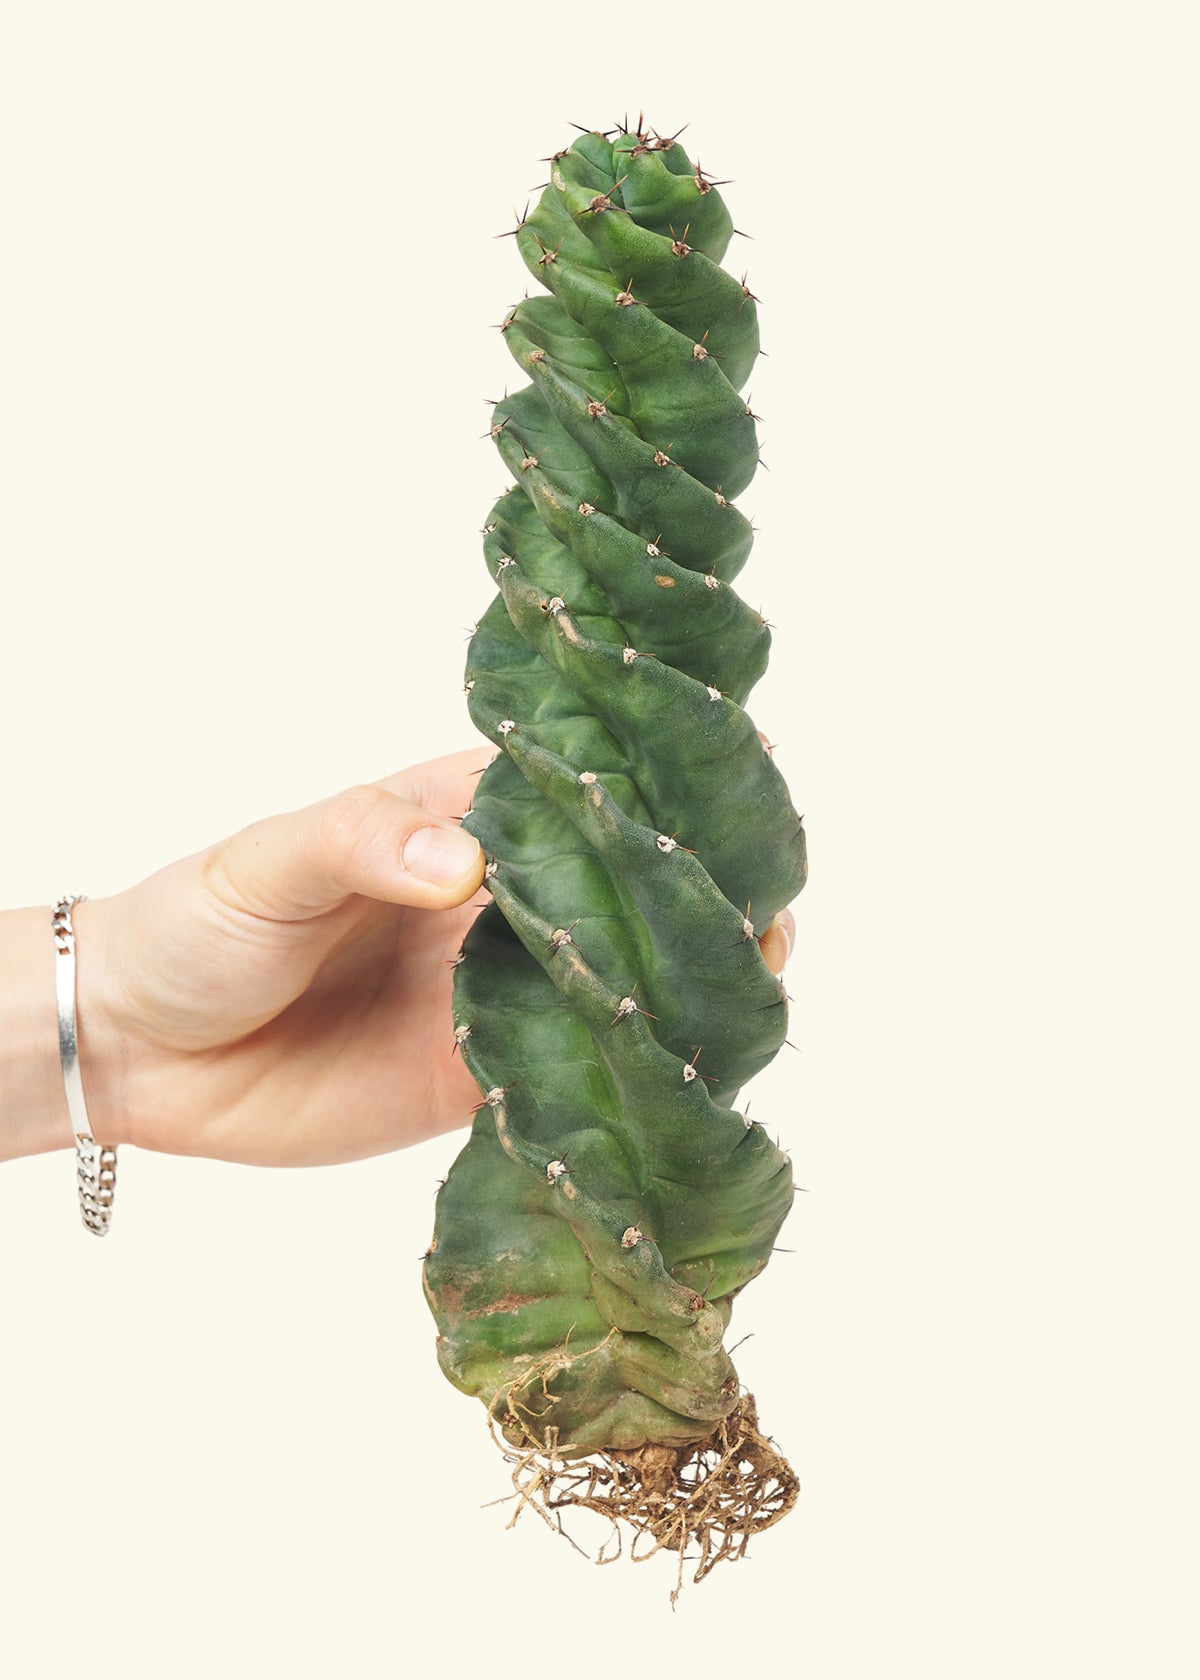 Hand holding a spiral cactus, side profile